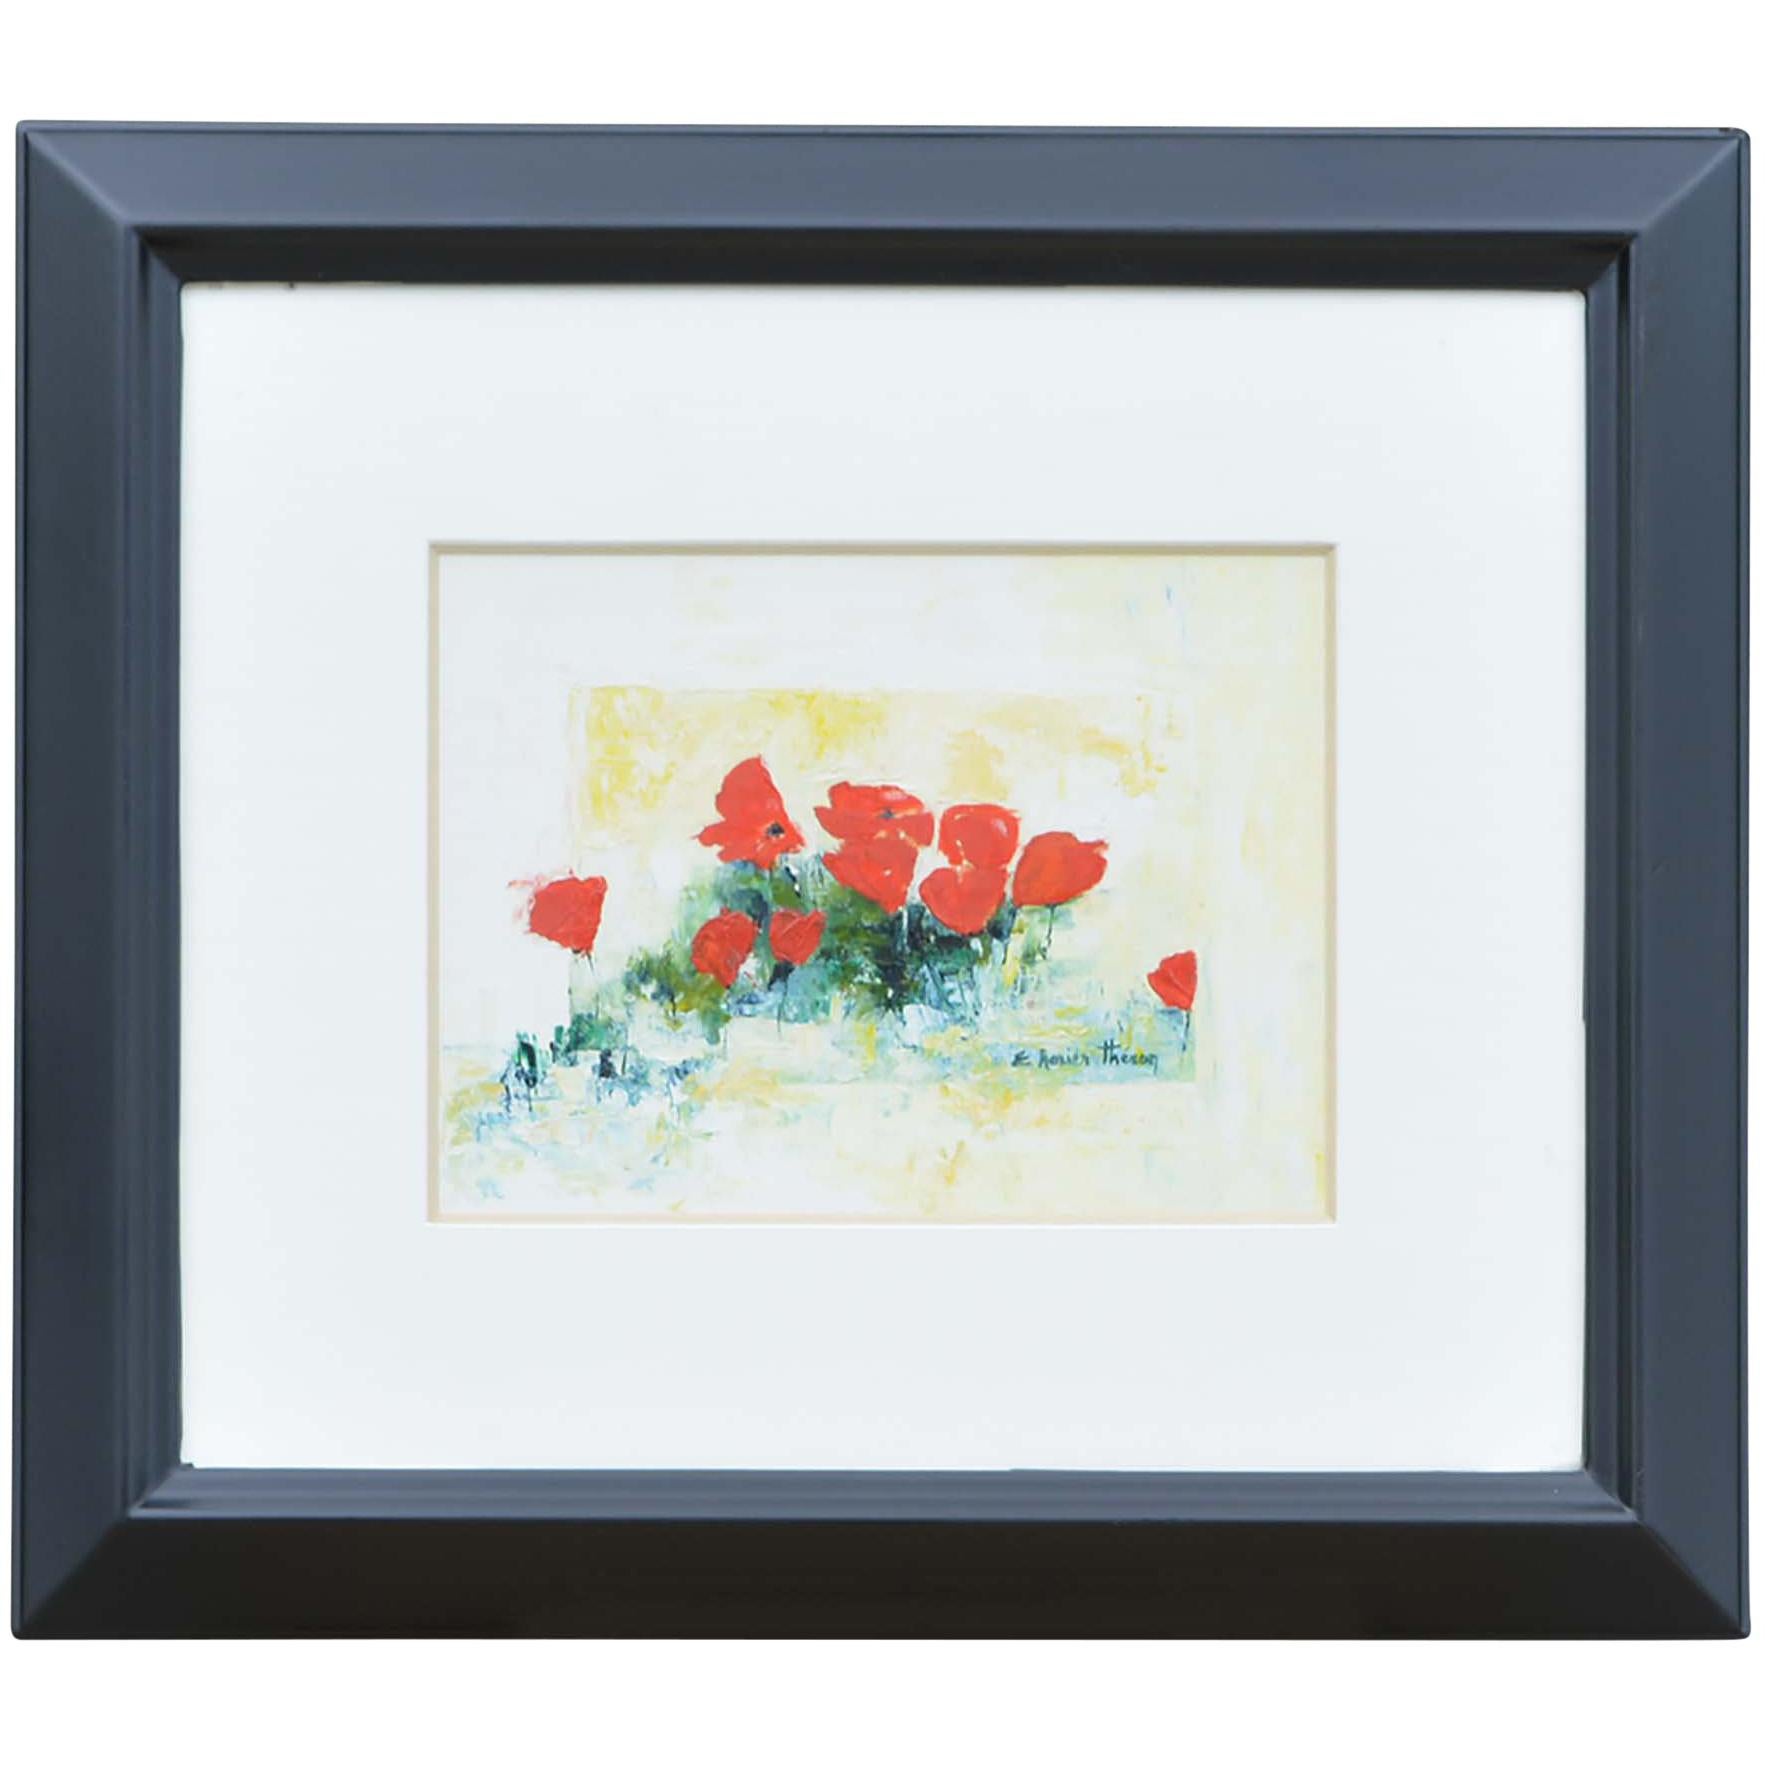 E Ronier Theron, Bright Red Floral Painting For Sale